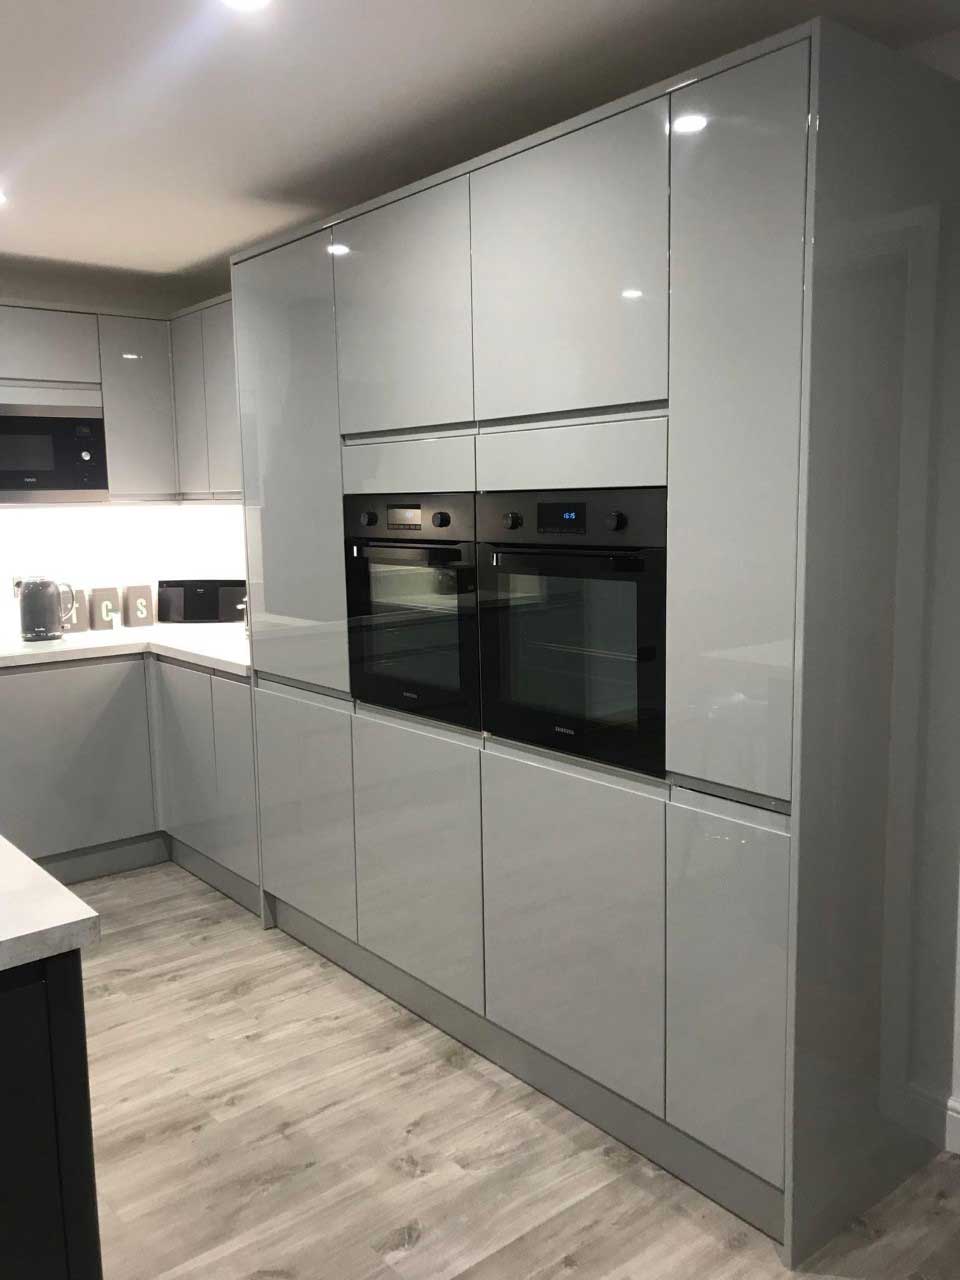 Kitchens & Design Richhill | Fully Fitted Kitchens | NVL Kitchens